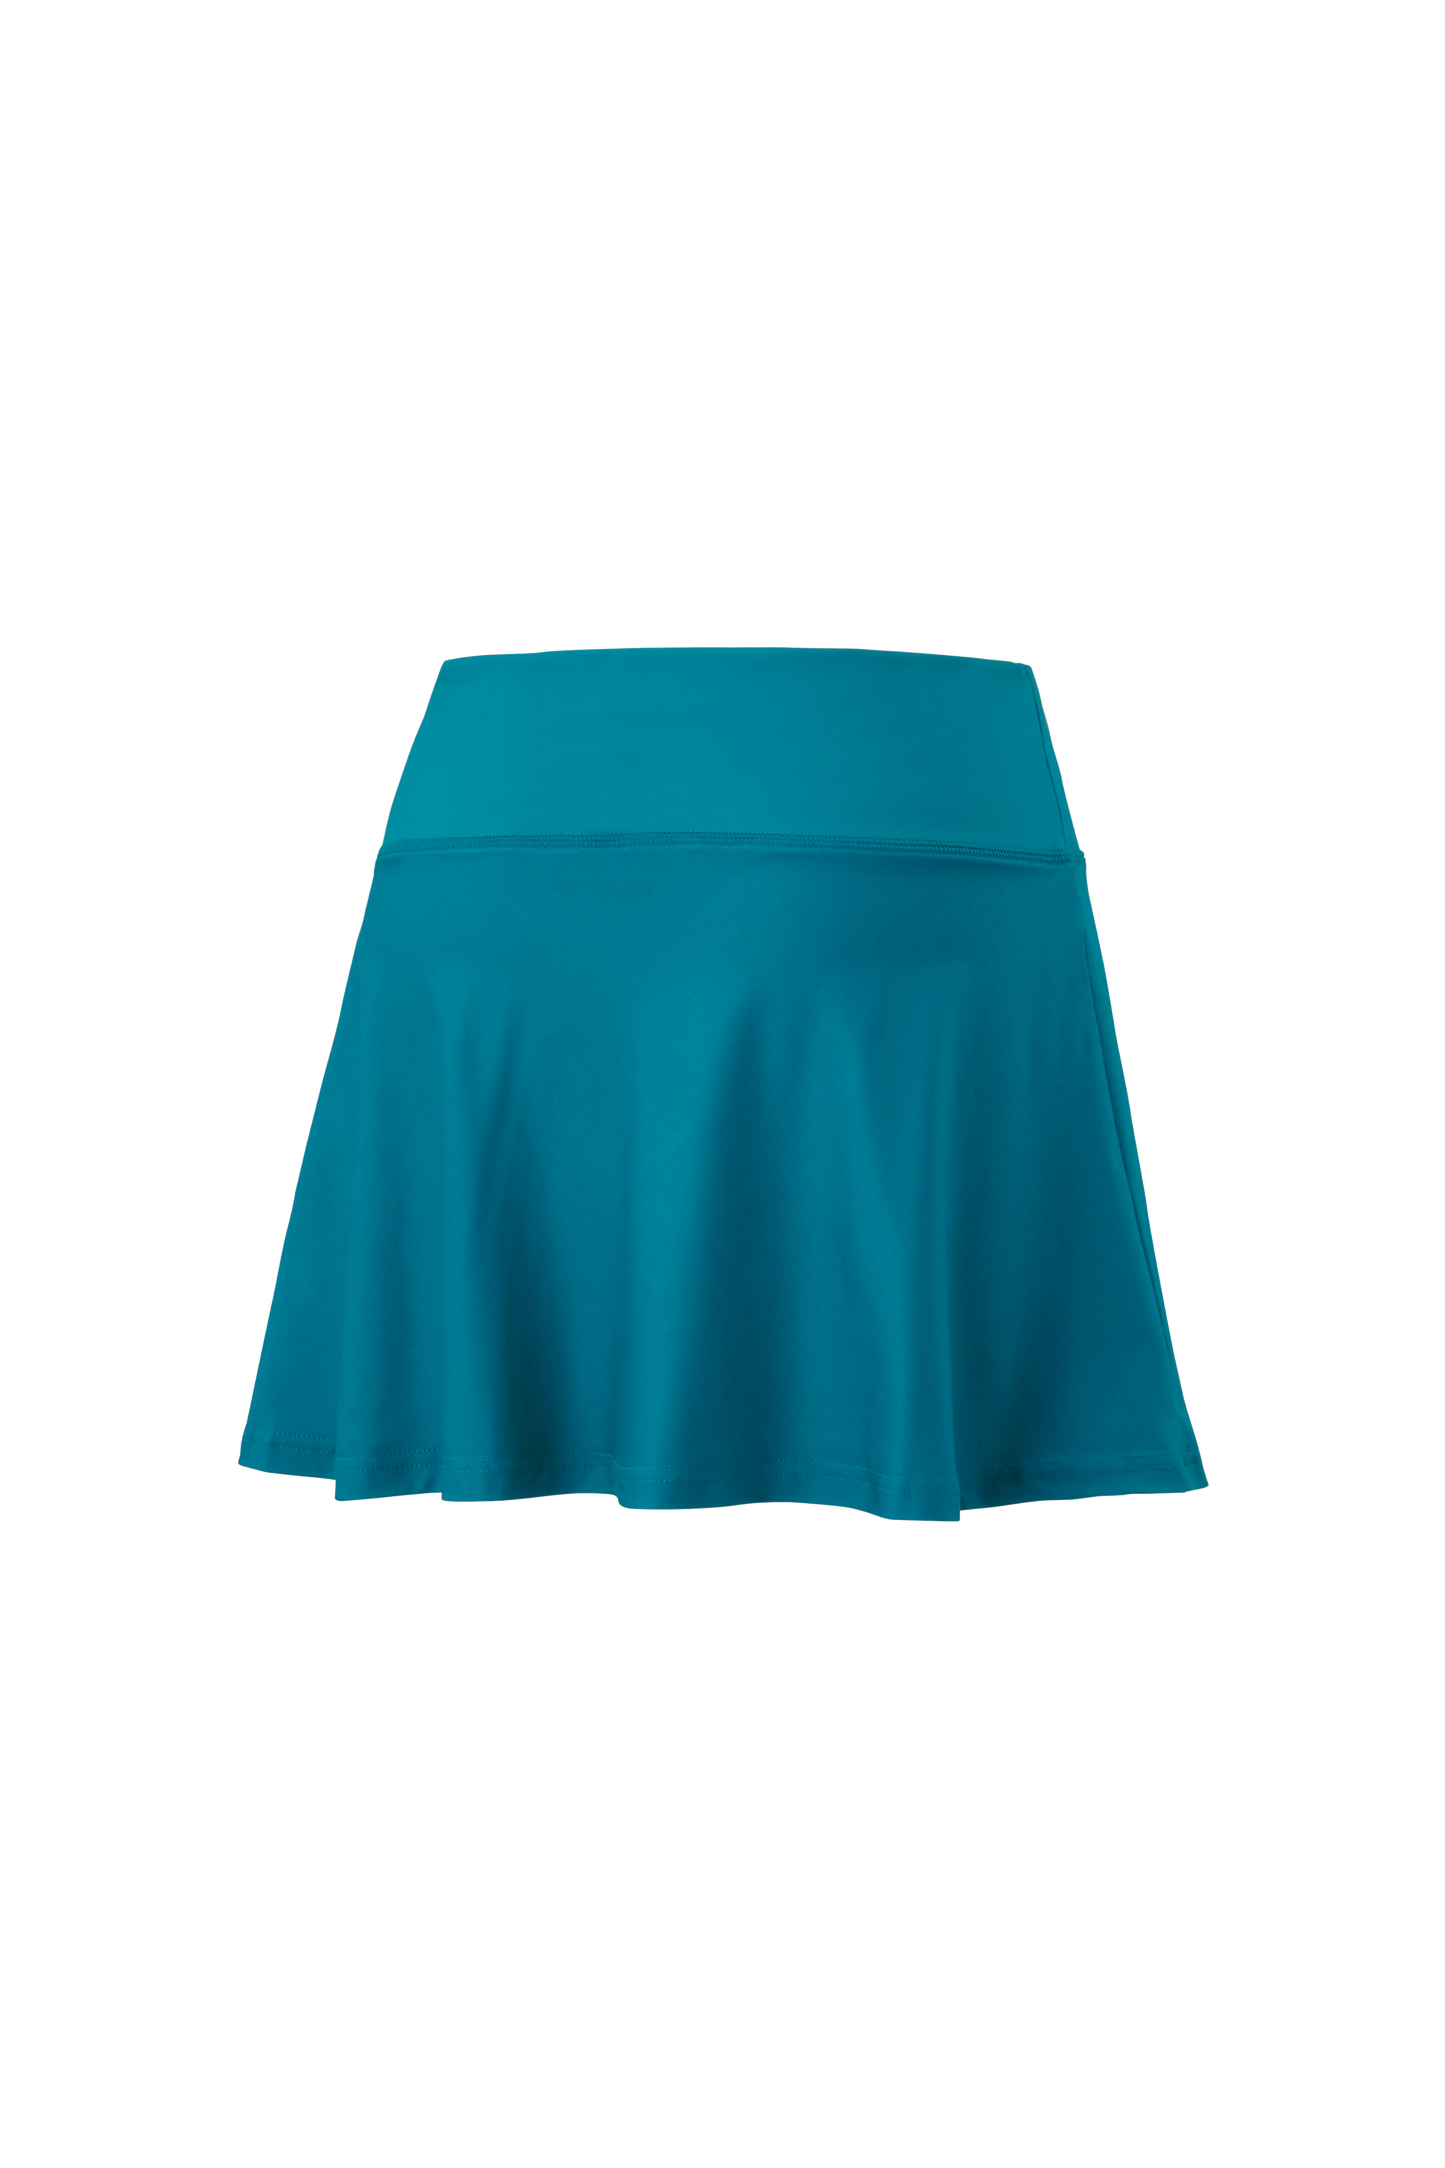 YONEX Lady's Skirt 26120 With Inner Short [Blue Green] - Max Sports